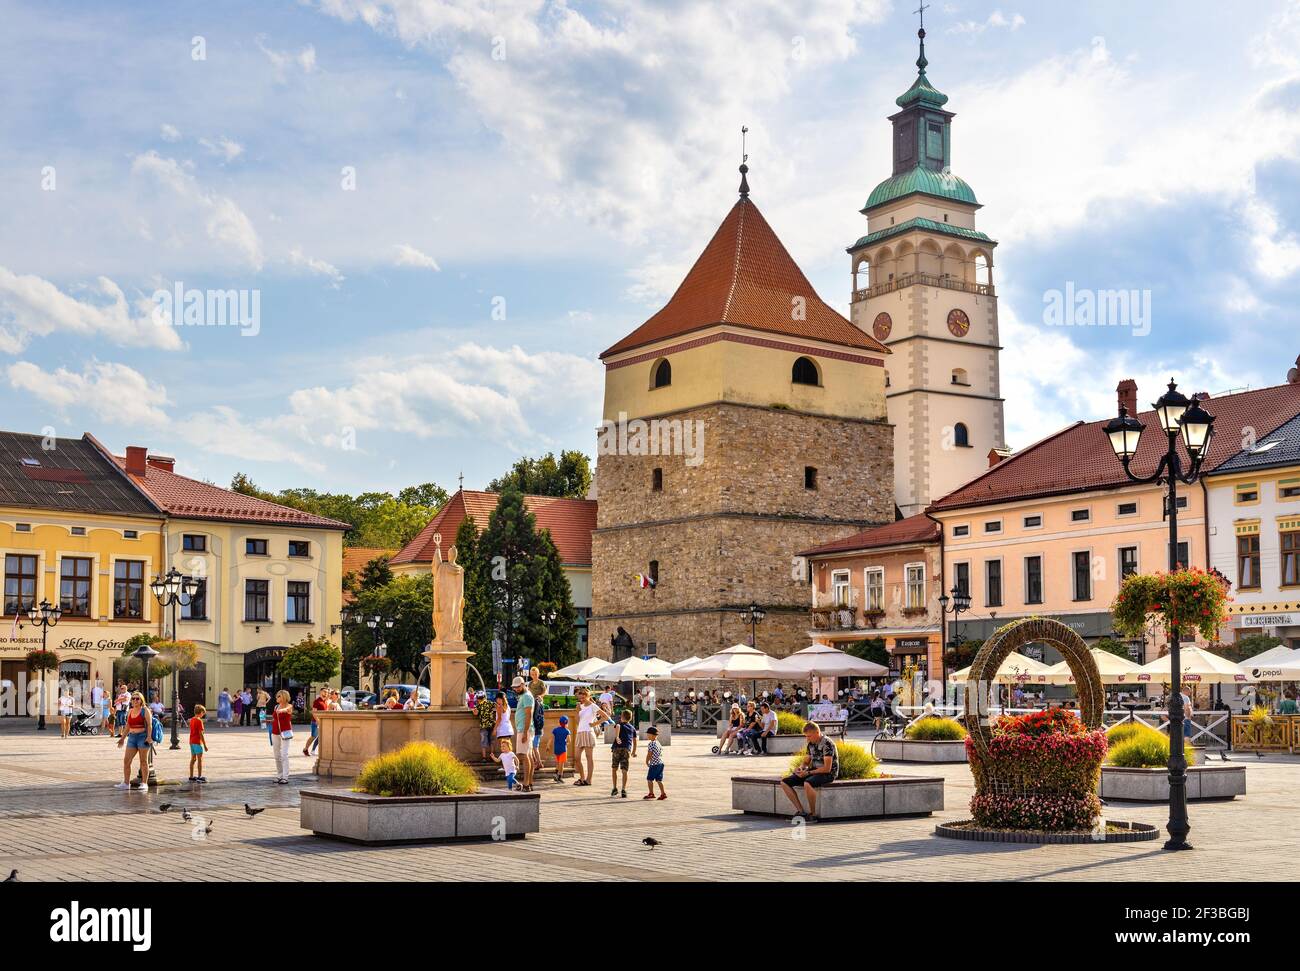 Zywiec, Poland - August 30, 2020: Panoramic view of market square with historic stone bell tower and Cathedral of Nativity of Blessed Virgin Mary in S Stock Photo